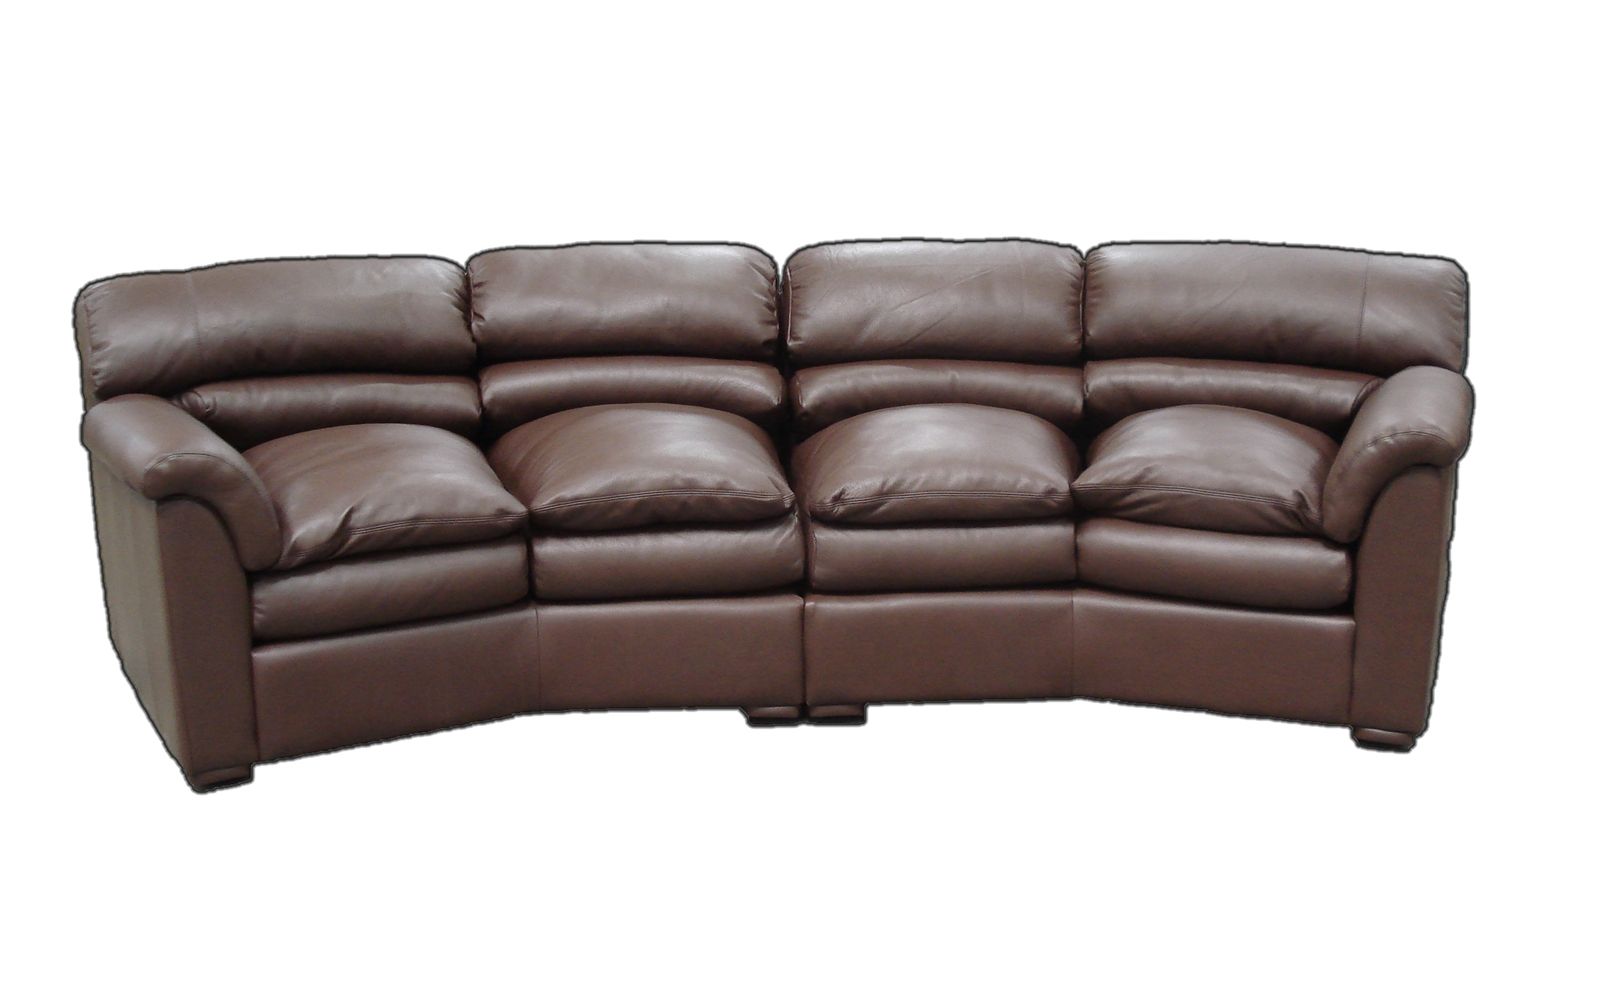 Canyon 4 Seat Conversation Sofa Omnia Leather With 4 Seat Couch (View 14 of 15)